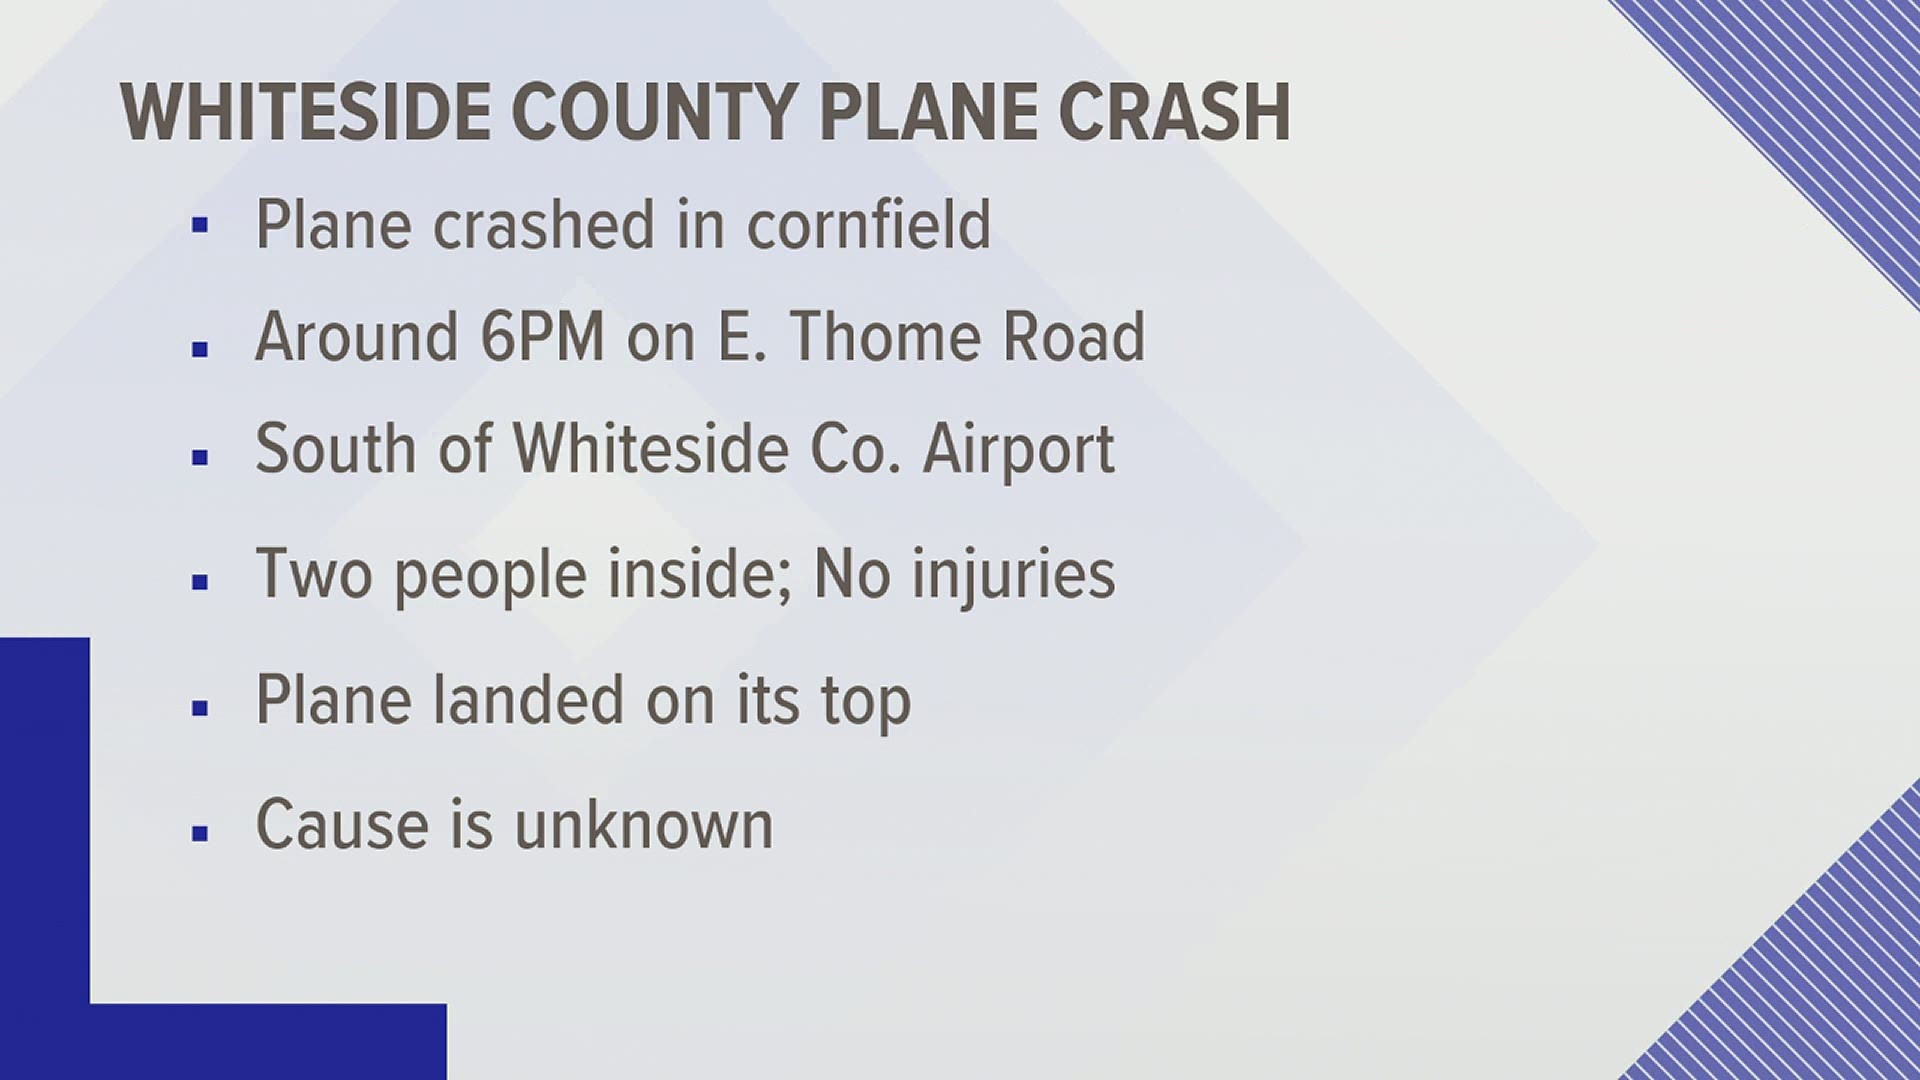 Authorities say the plane crashed in a cornfield south of the Whiteside County Airport.